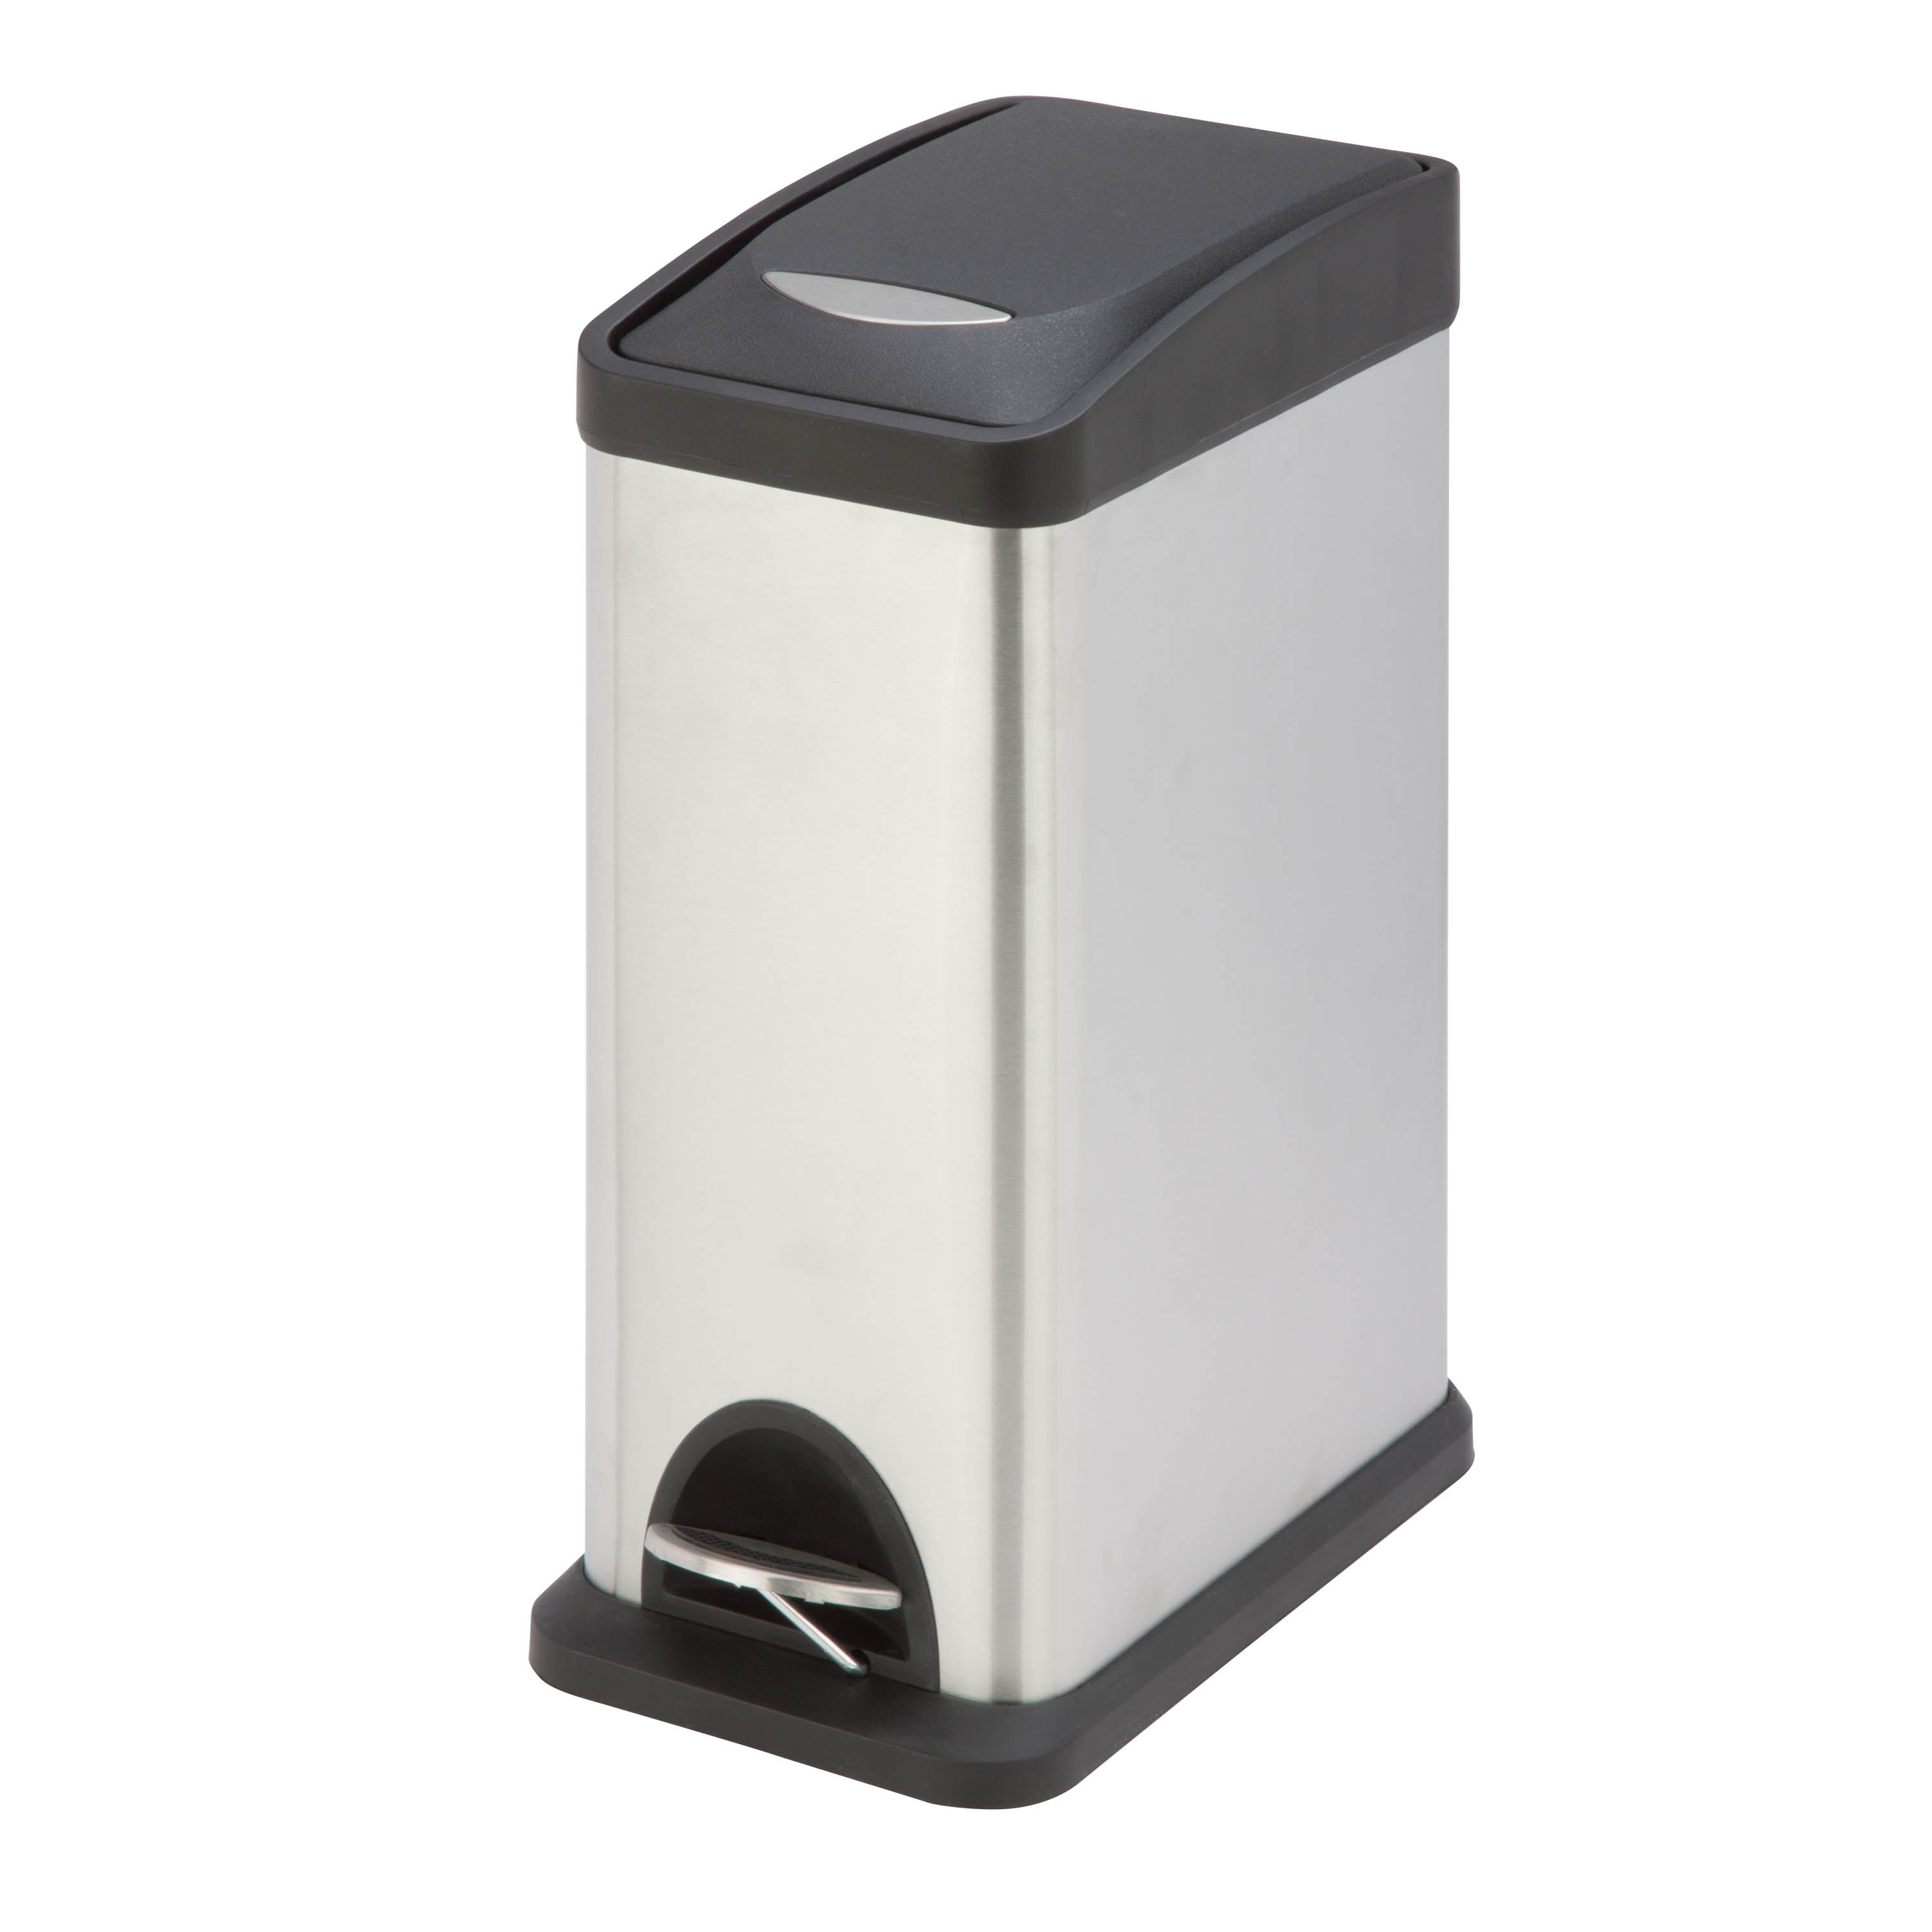 Tall Kitchen Plastic Rectangular Trash Can with Steel Pedal, Black